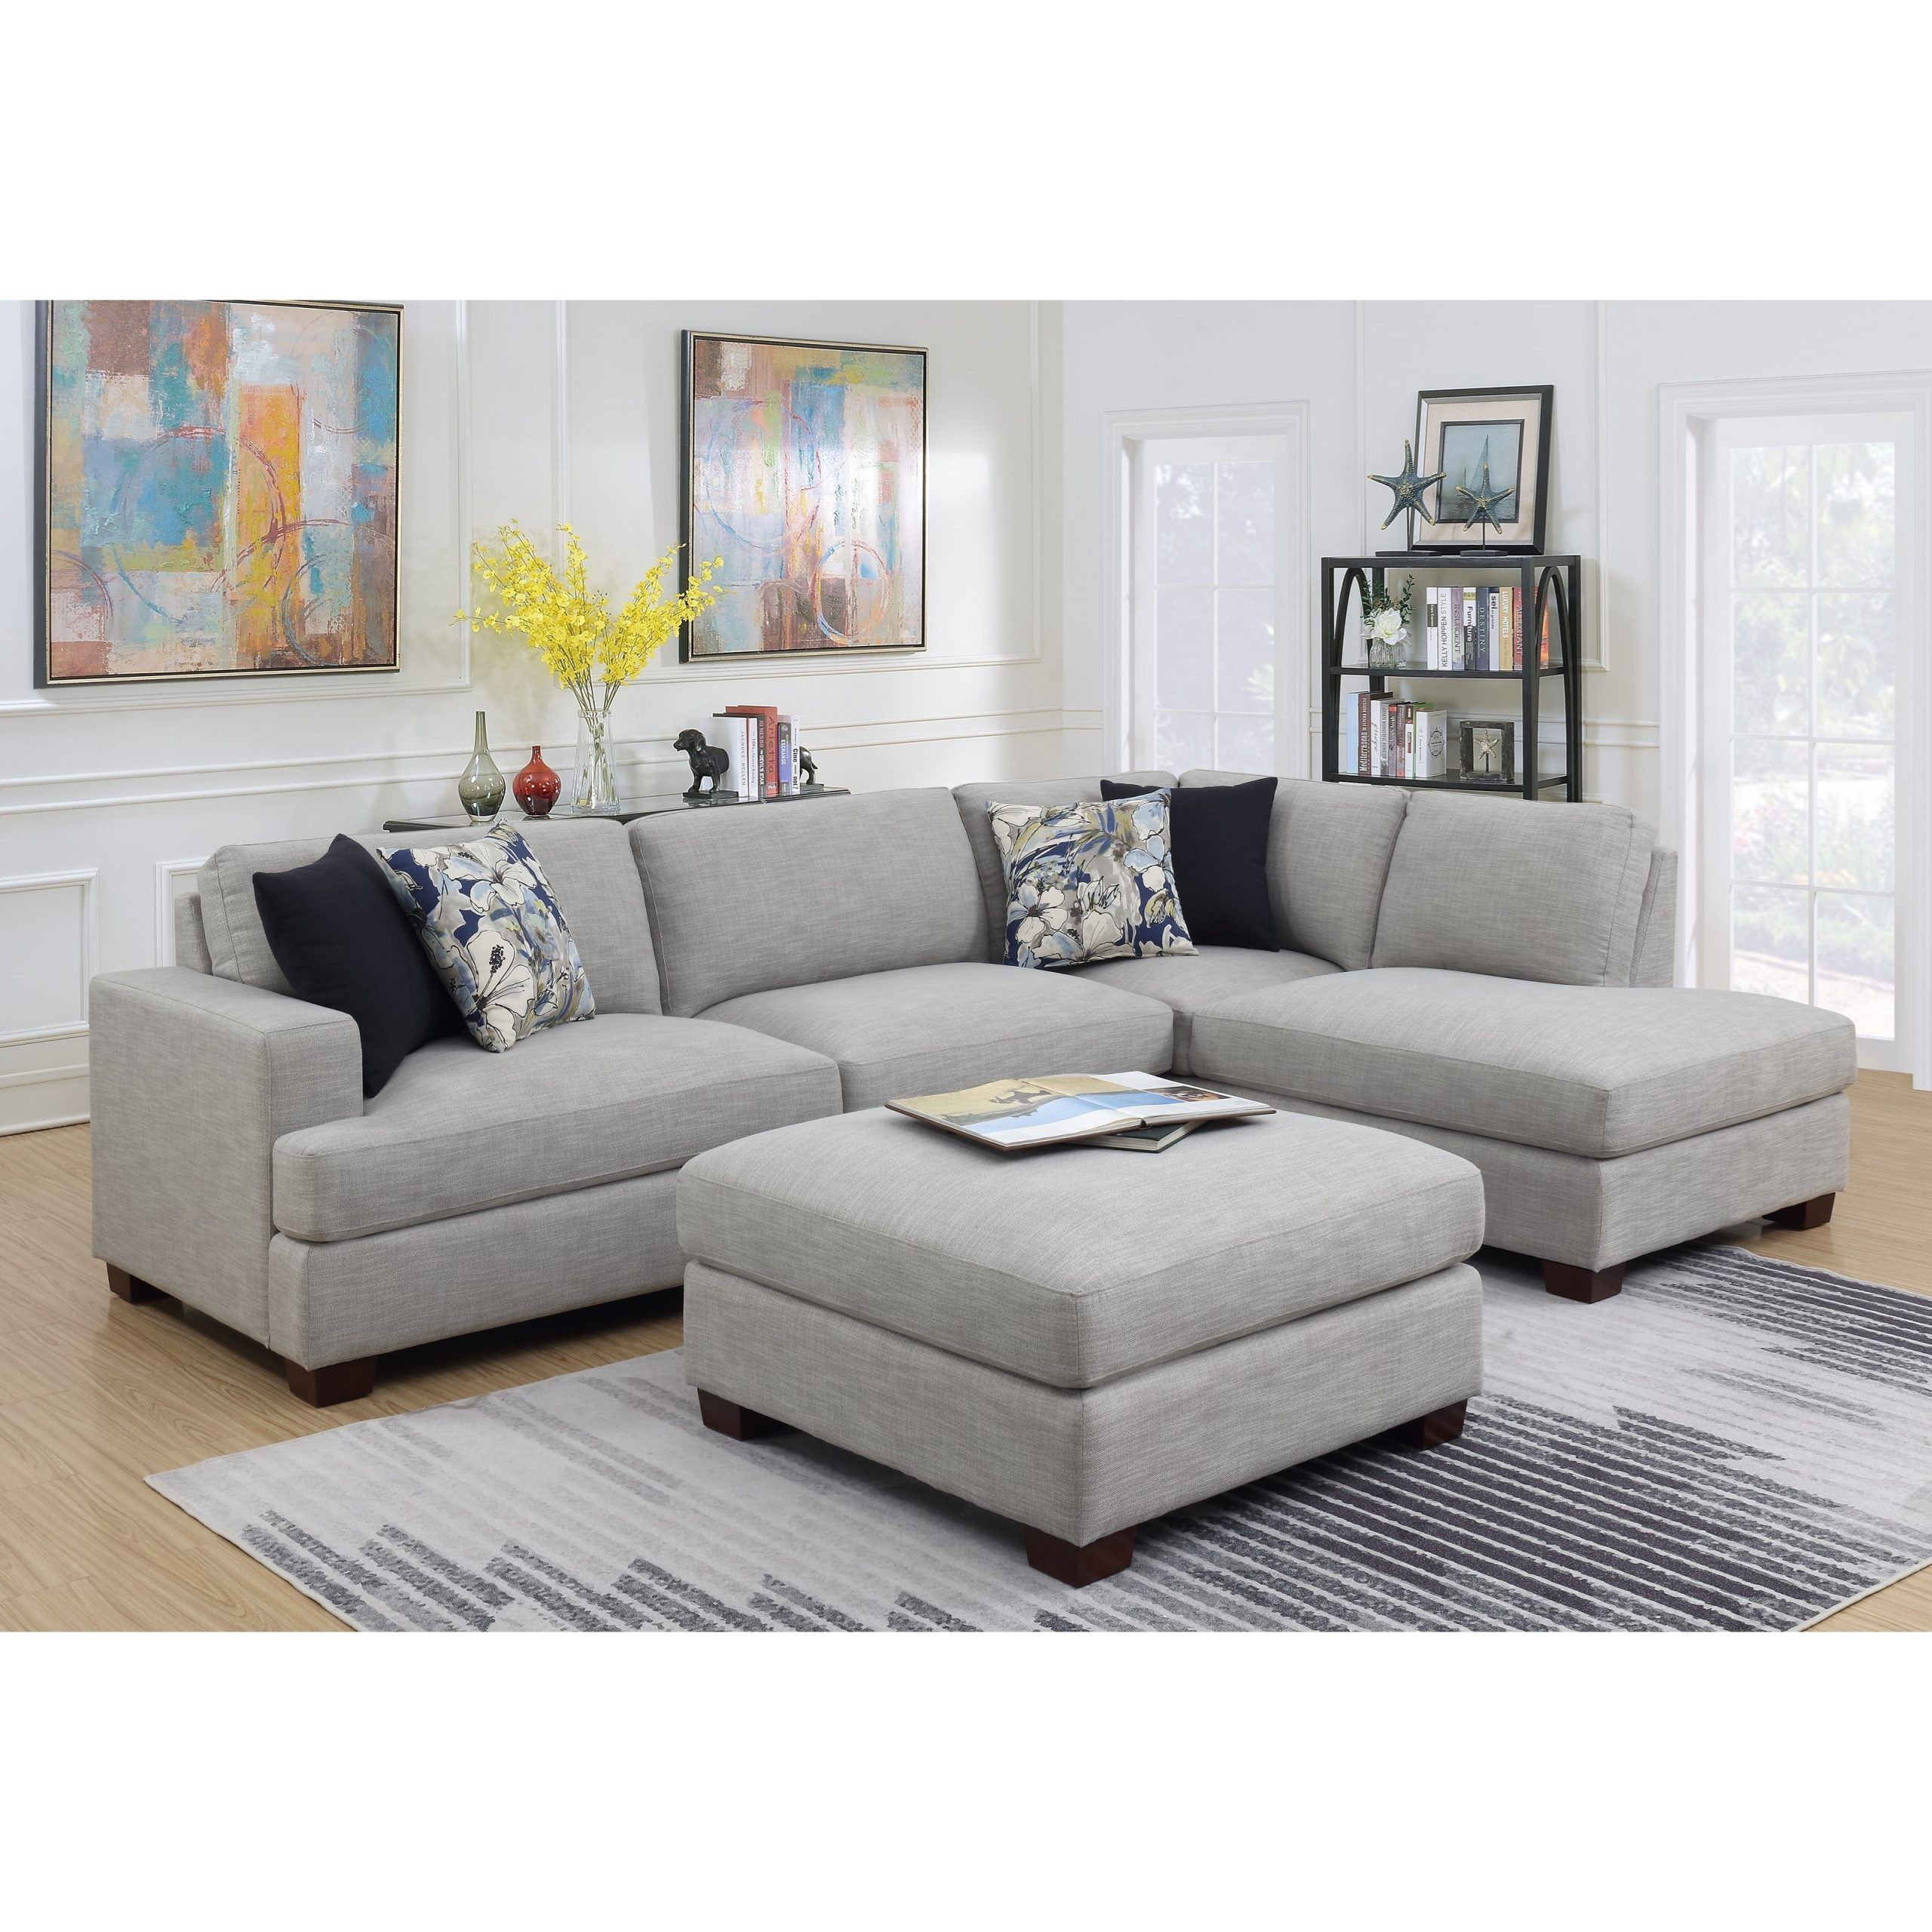 Featured Photo of  Best 15+ of 2pc Burland Contemporary Chaise Sectional Sofas